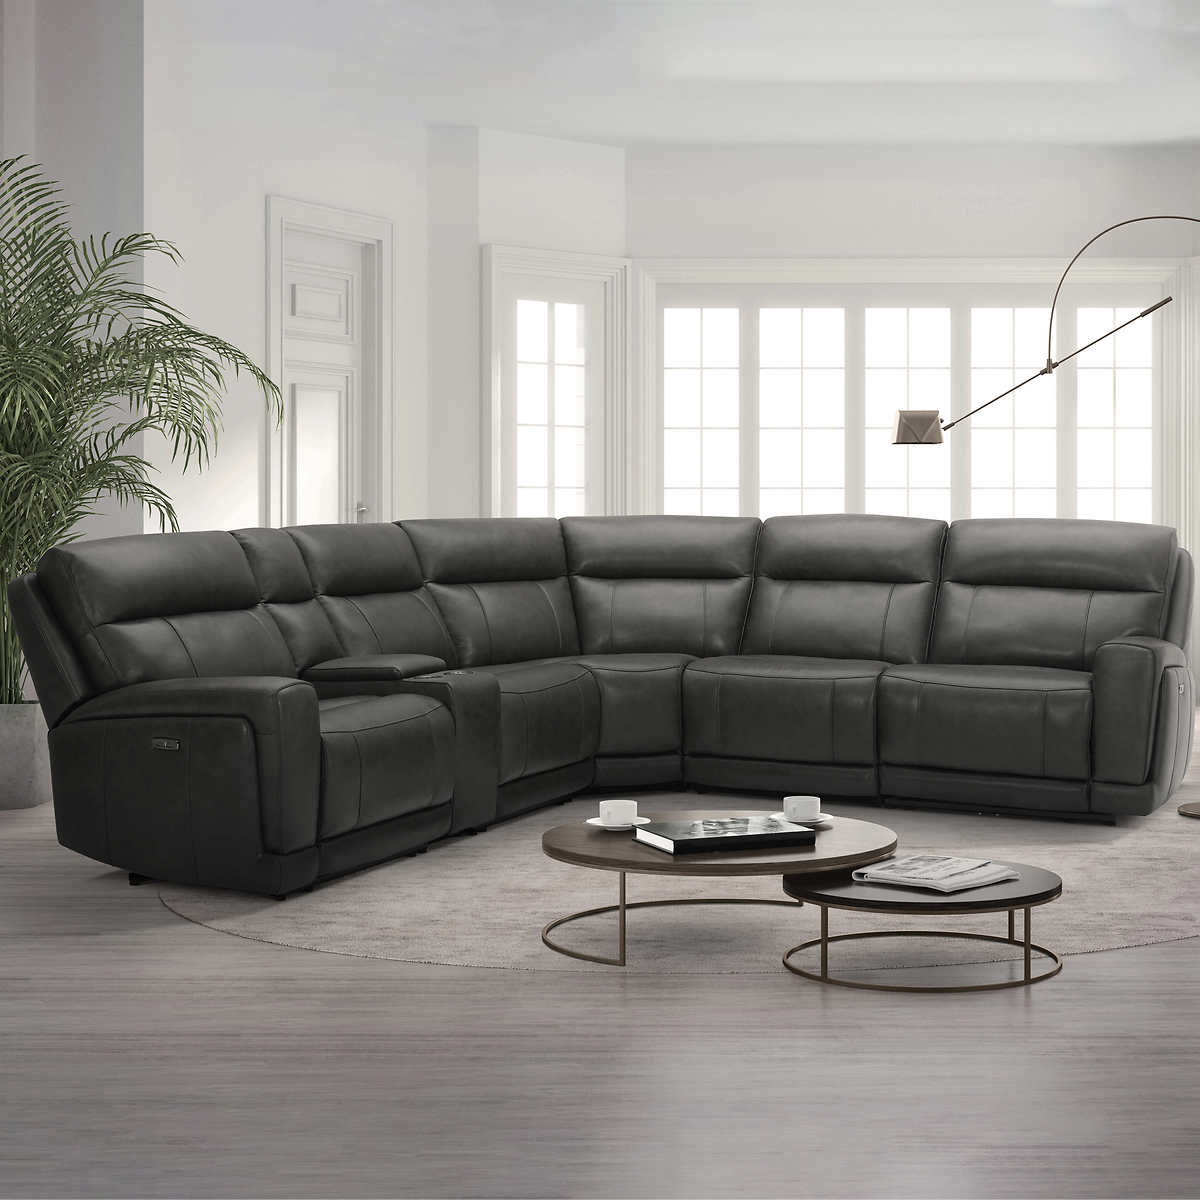 Leather Power Reclining Sectional, Light Grey Leather Sectional With Recliners